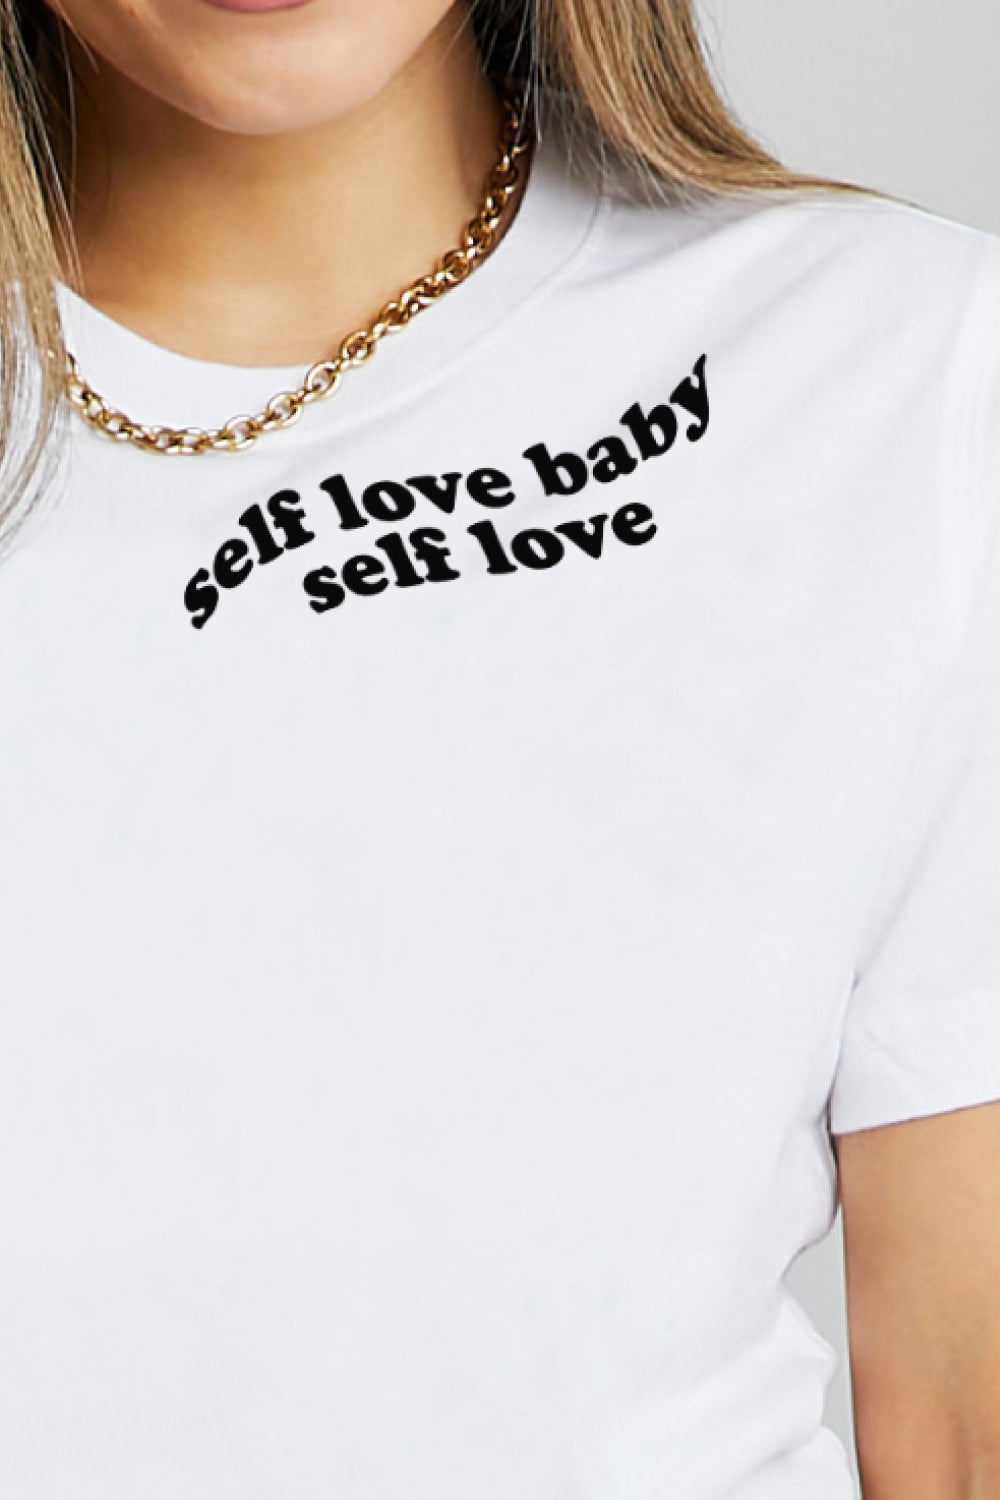 Simply Love Full Size SELF LOVE BABY SELF LOVE Graphic Cotton T-Shirt